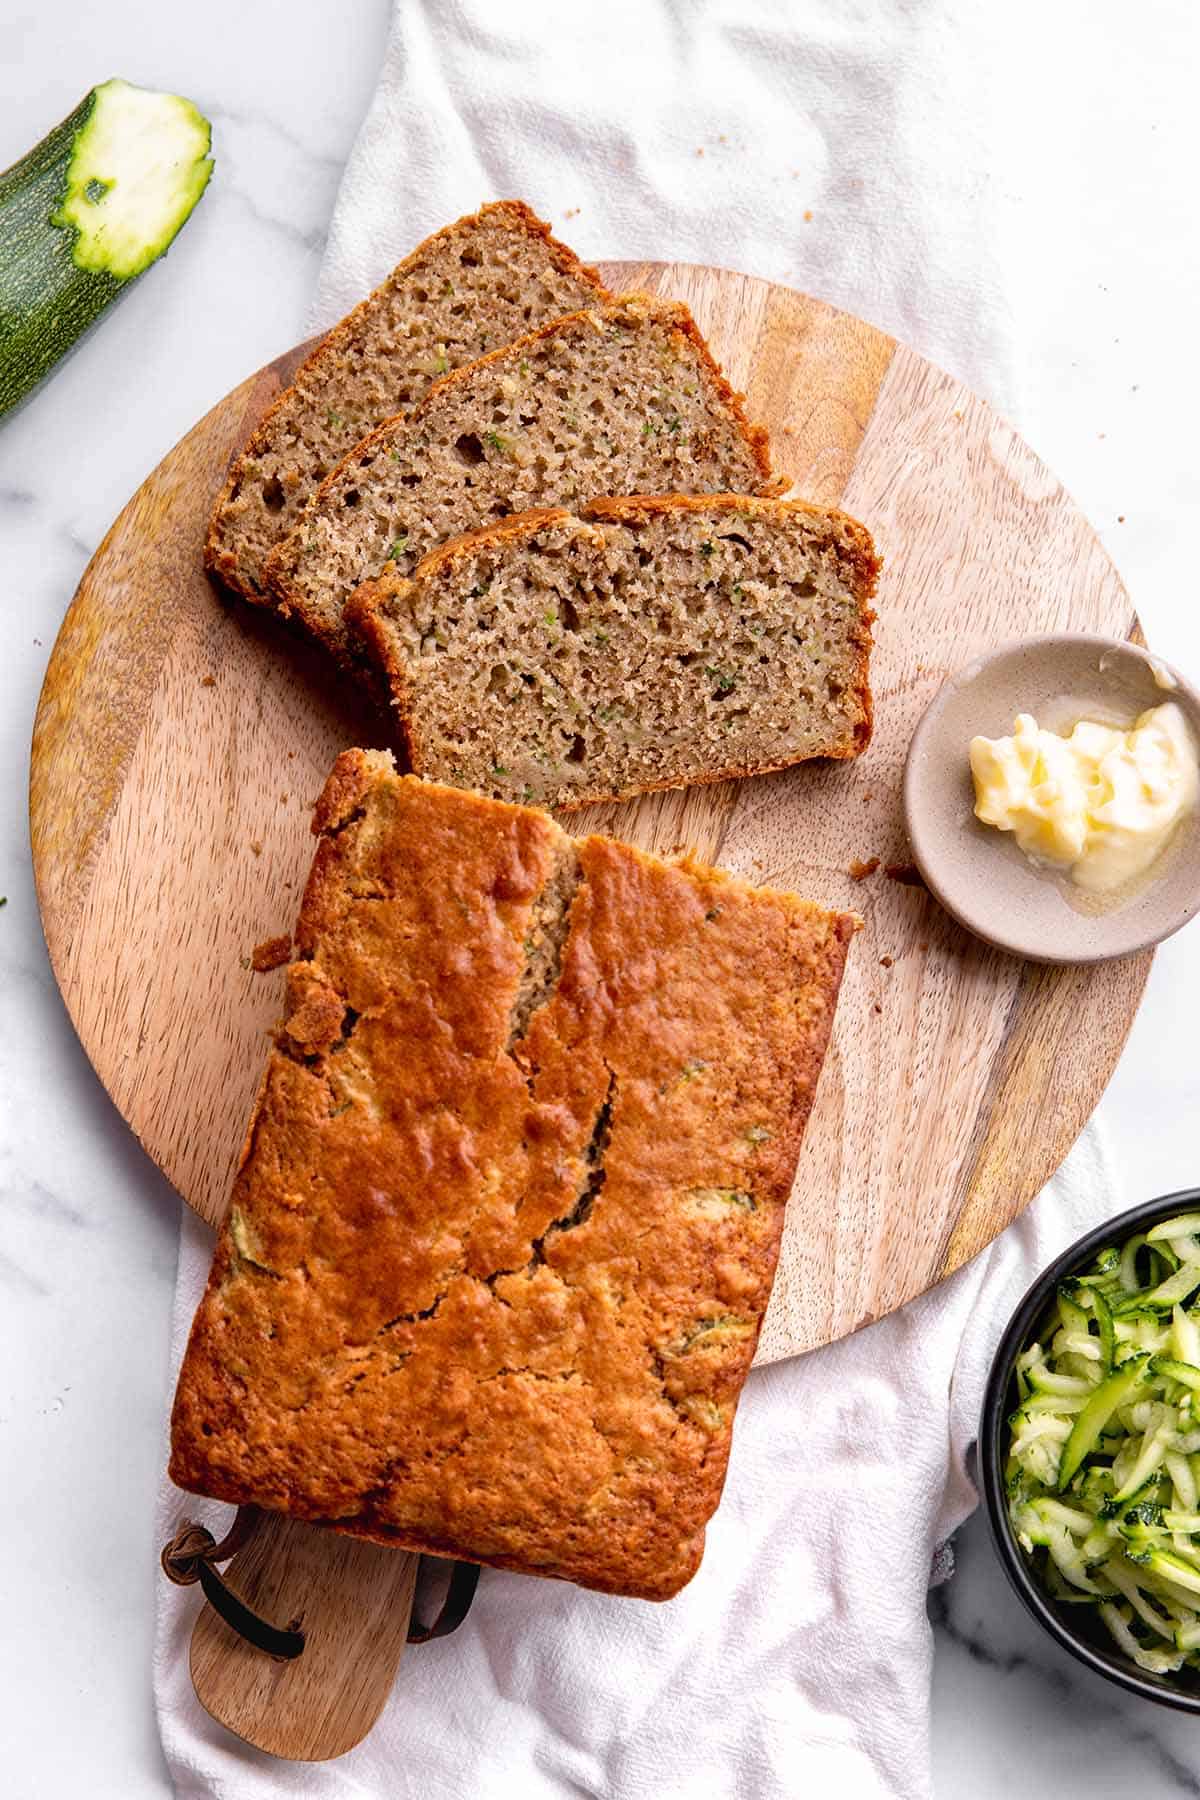 A loaf of zucchini bread sitting on a wooden board with shredded zucchini.